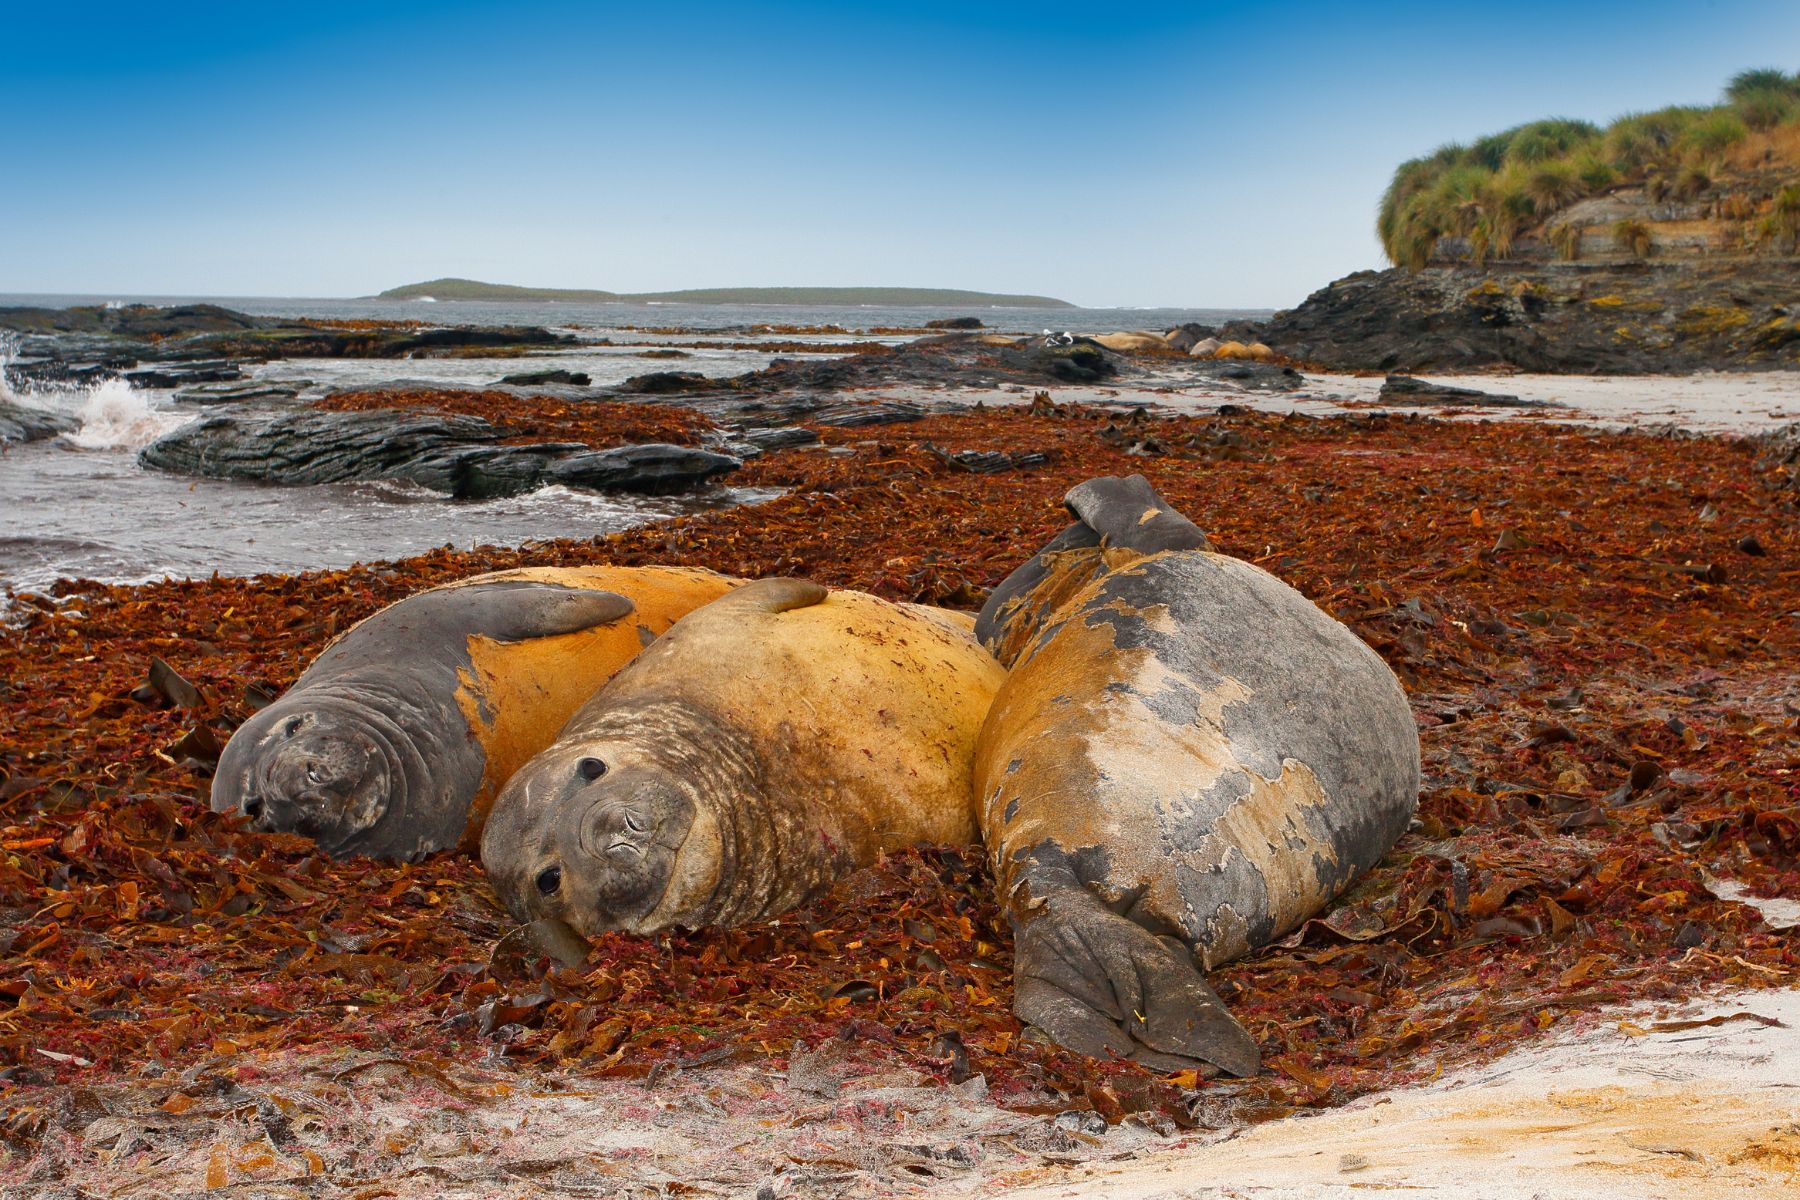 Elephant seals lying in the water pond, Falkland Islands